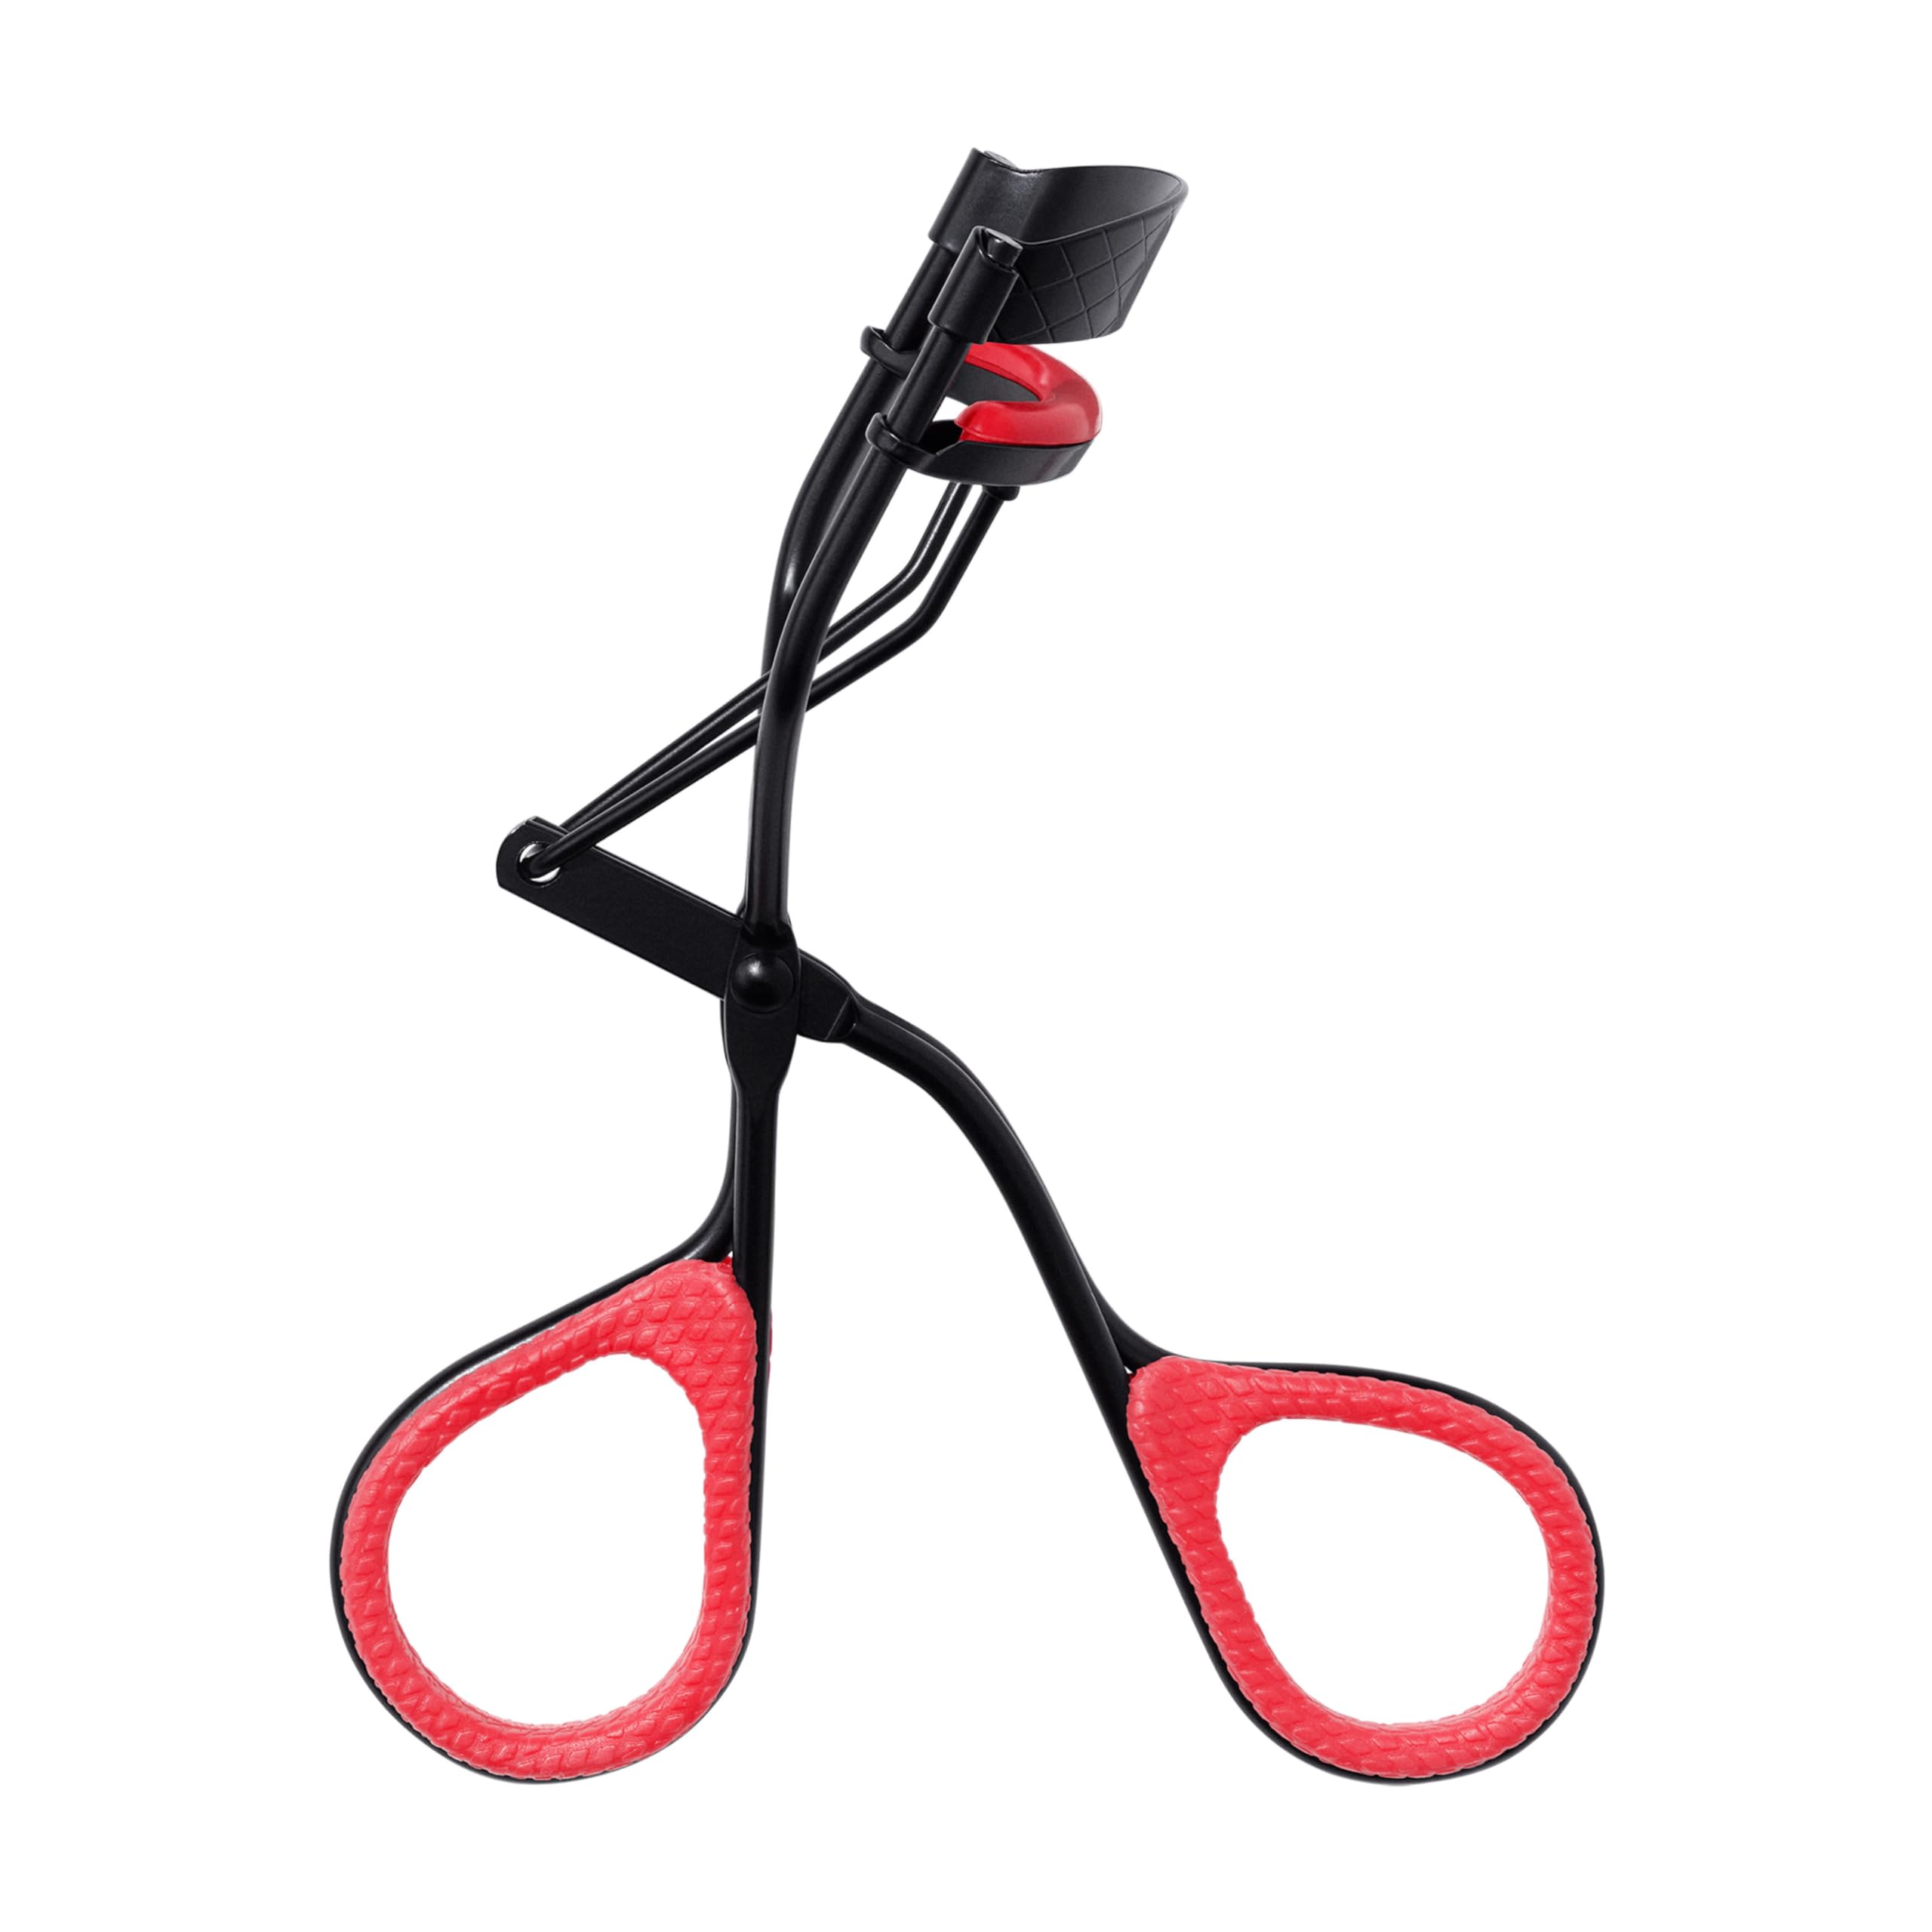 Revlon Extra Curl Lash Curler, Gives an All Day Dramatic Curl, with Finger Grips for a Non Slip Grip, Easy to Use, 1 Count